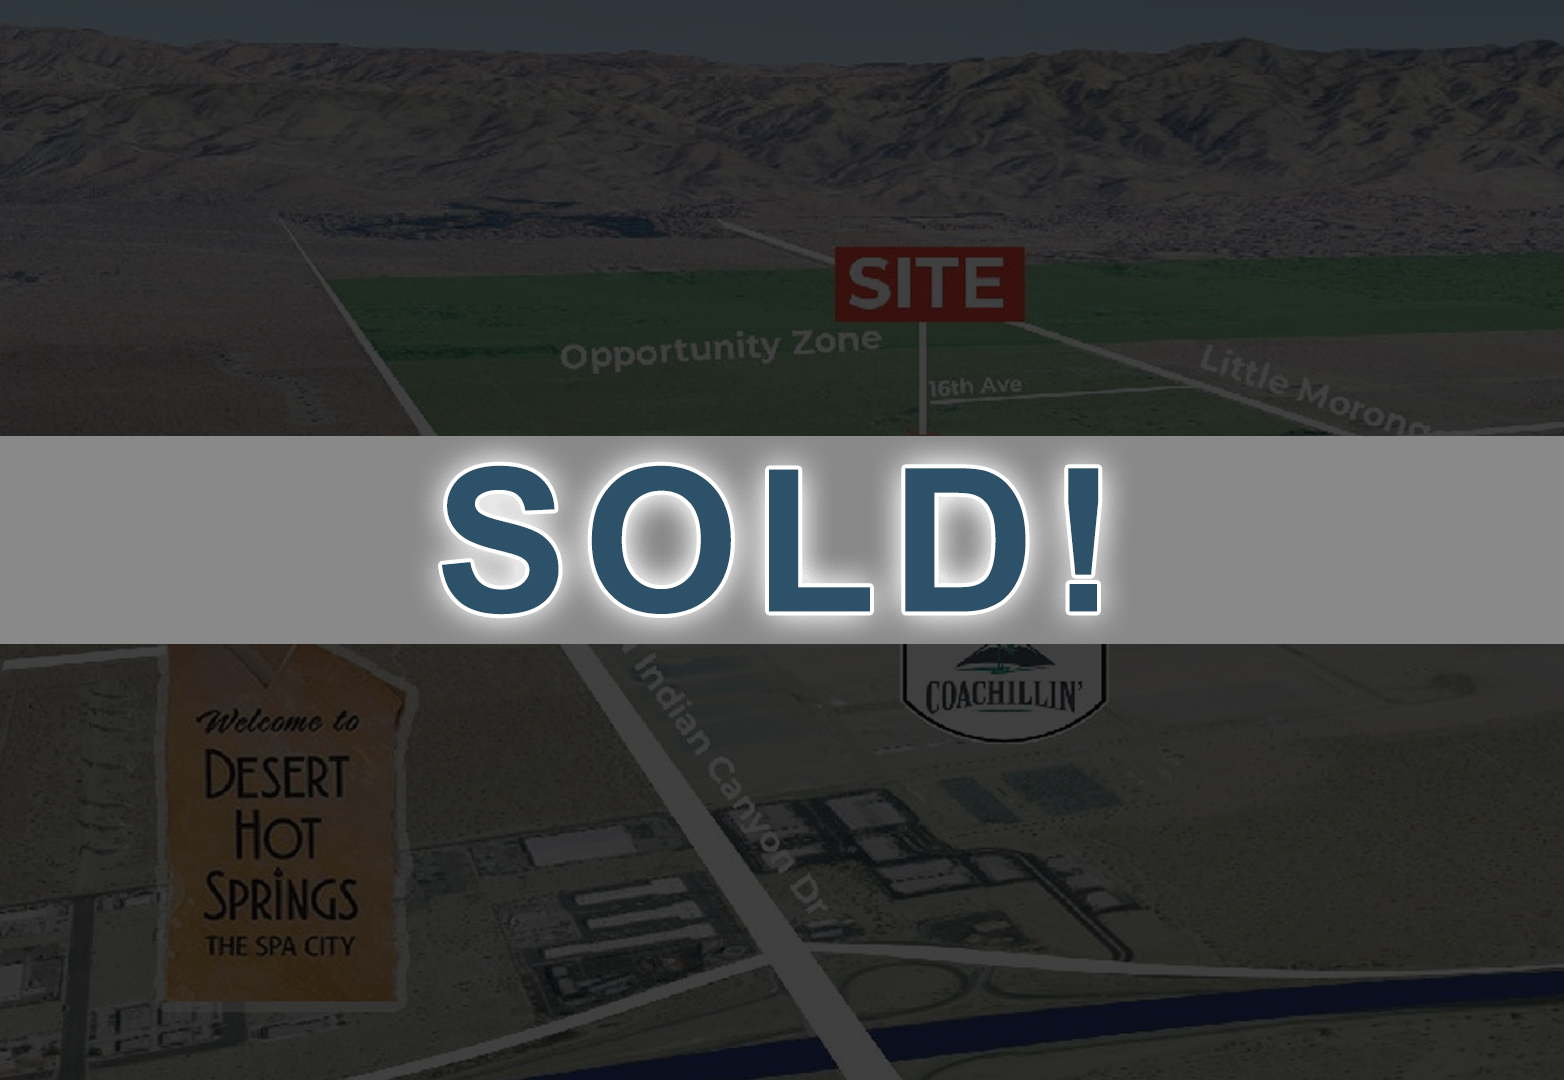 9.48 AC N Dillon-W, Desert Hot Springs Featured Web - Sold